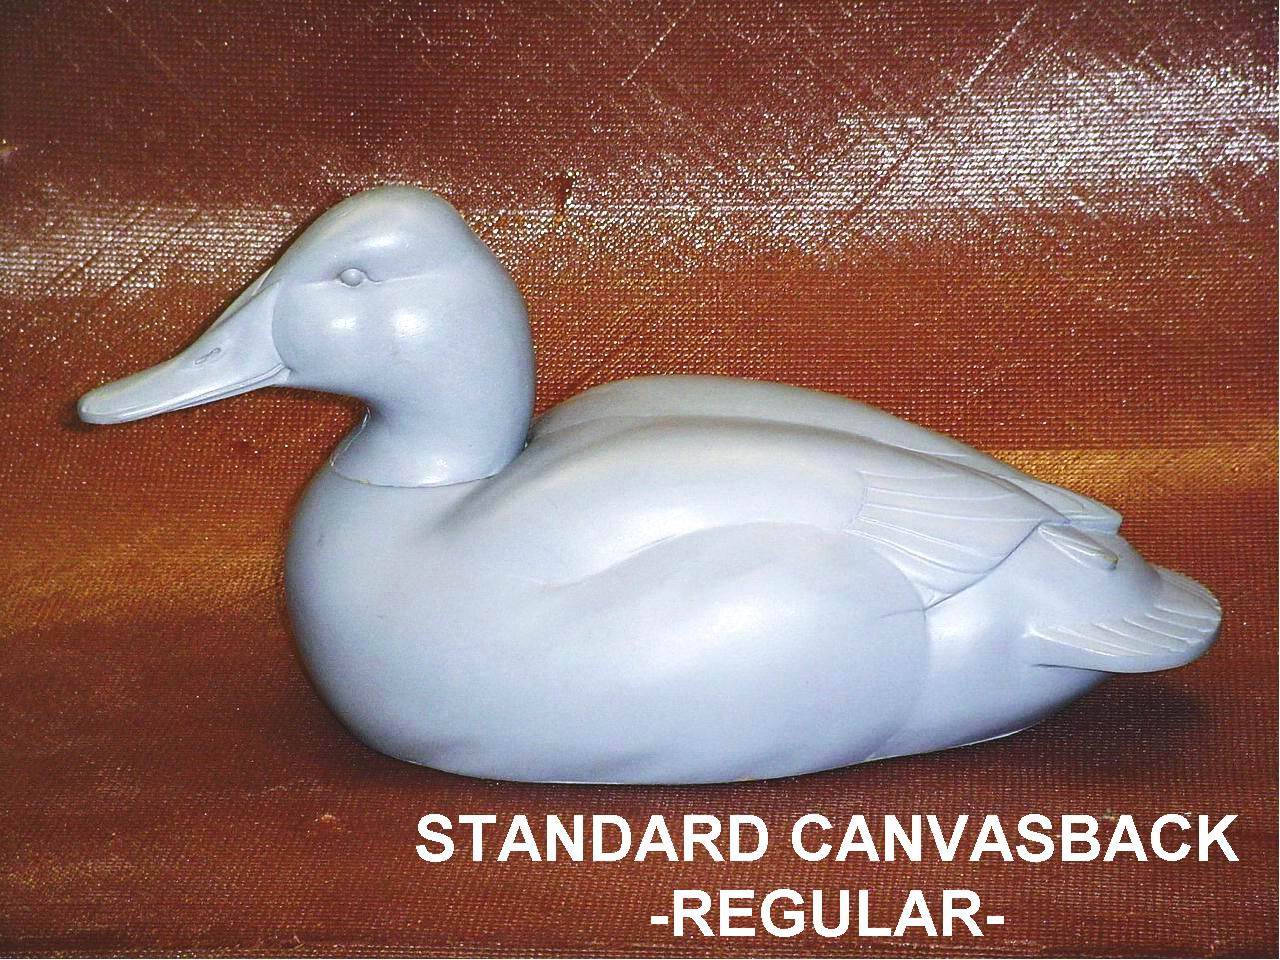 Canvasback by Bud Shell